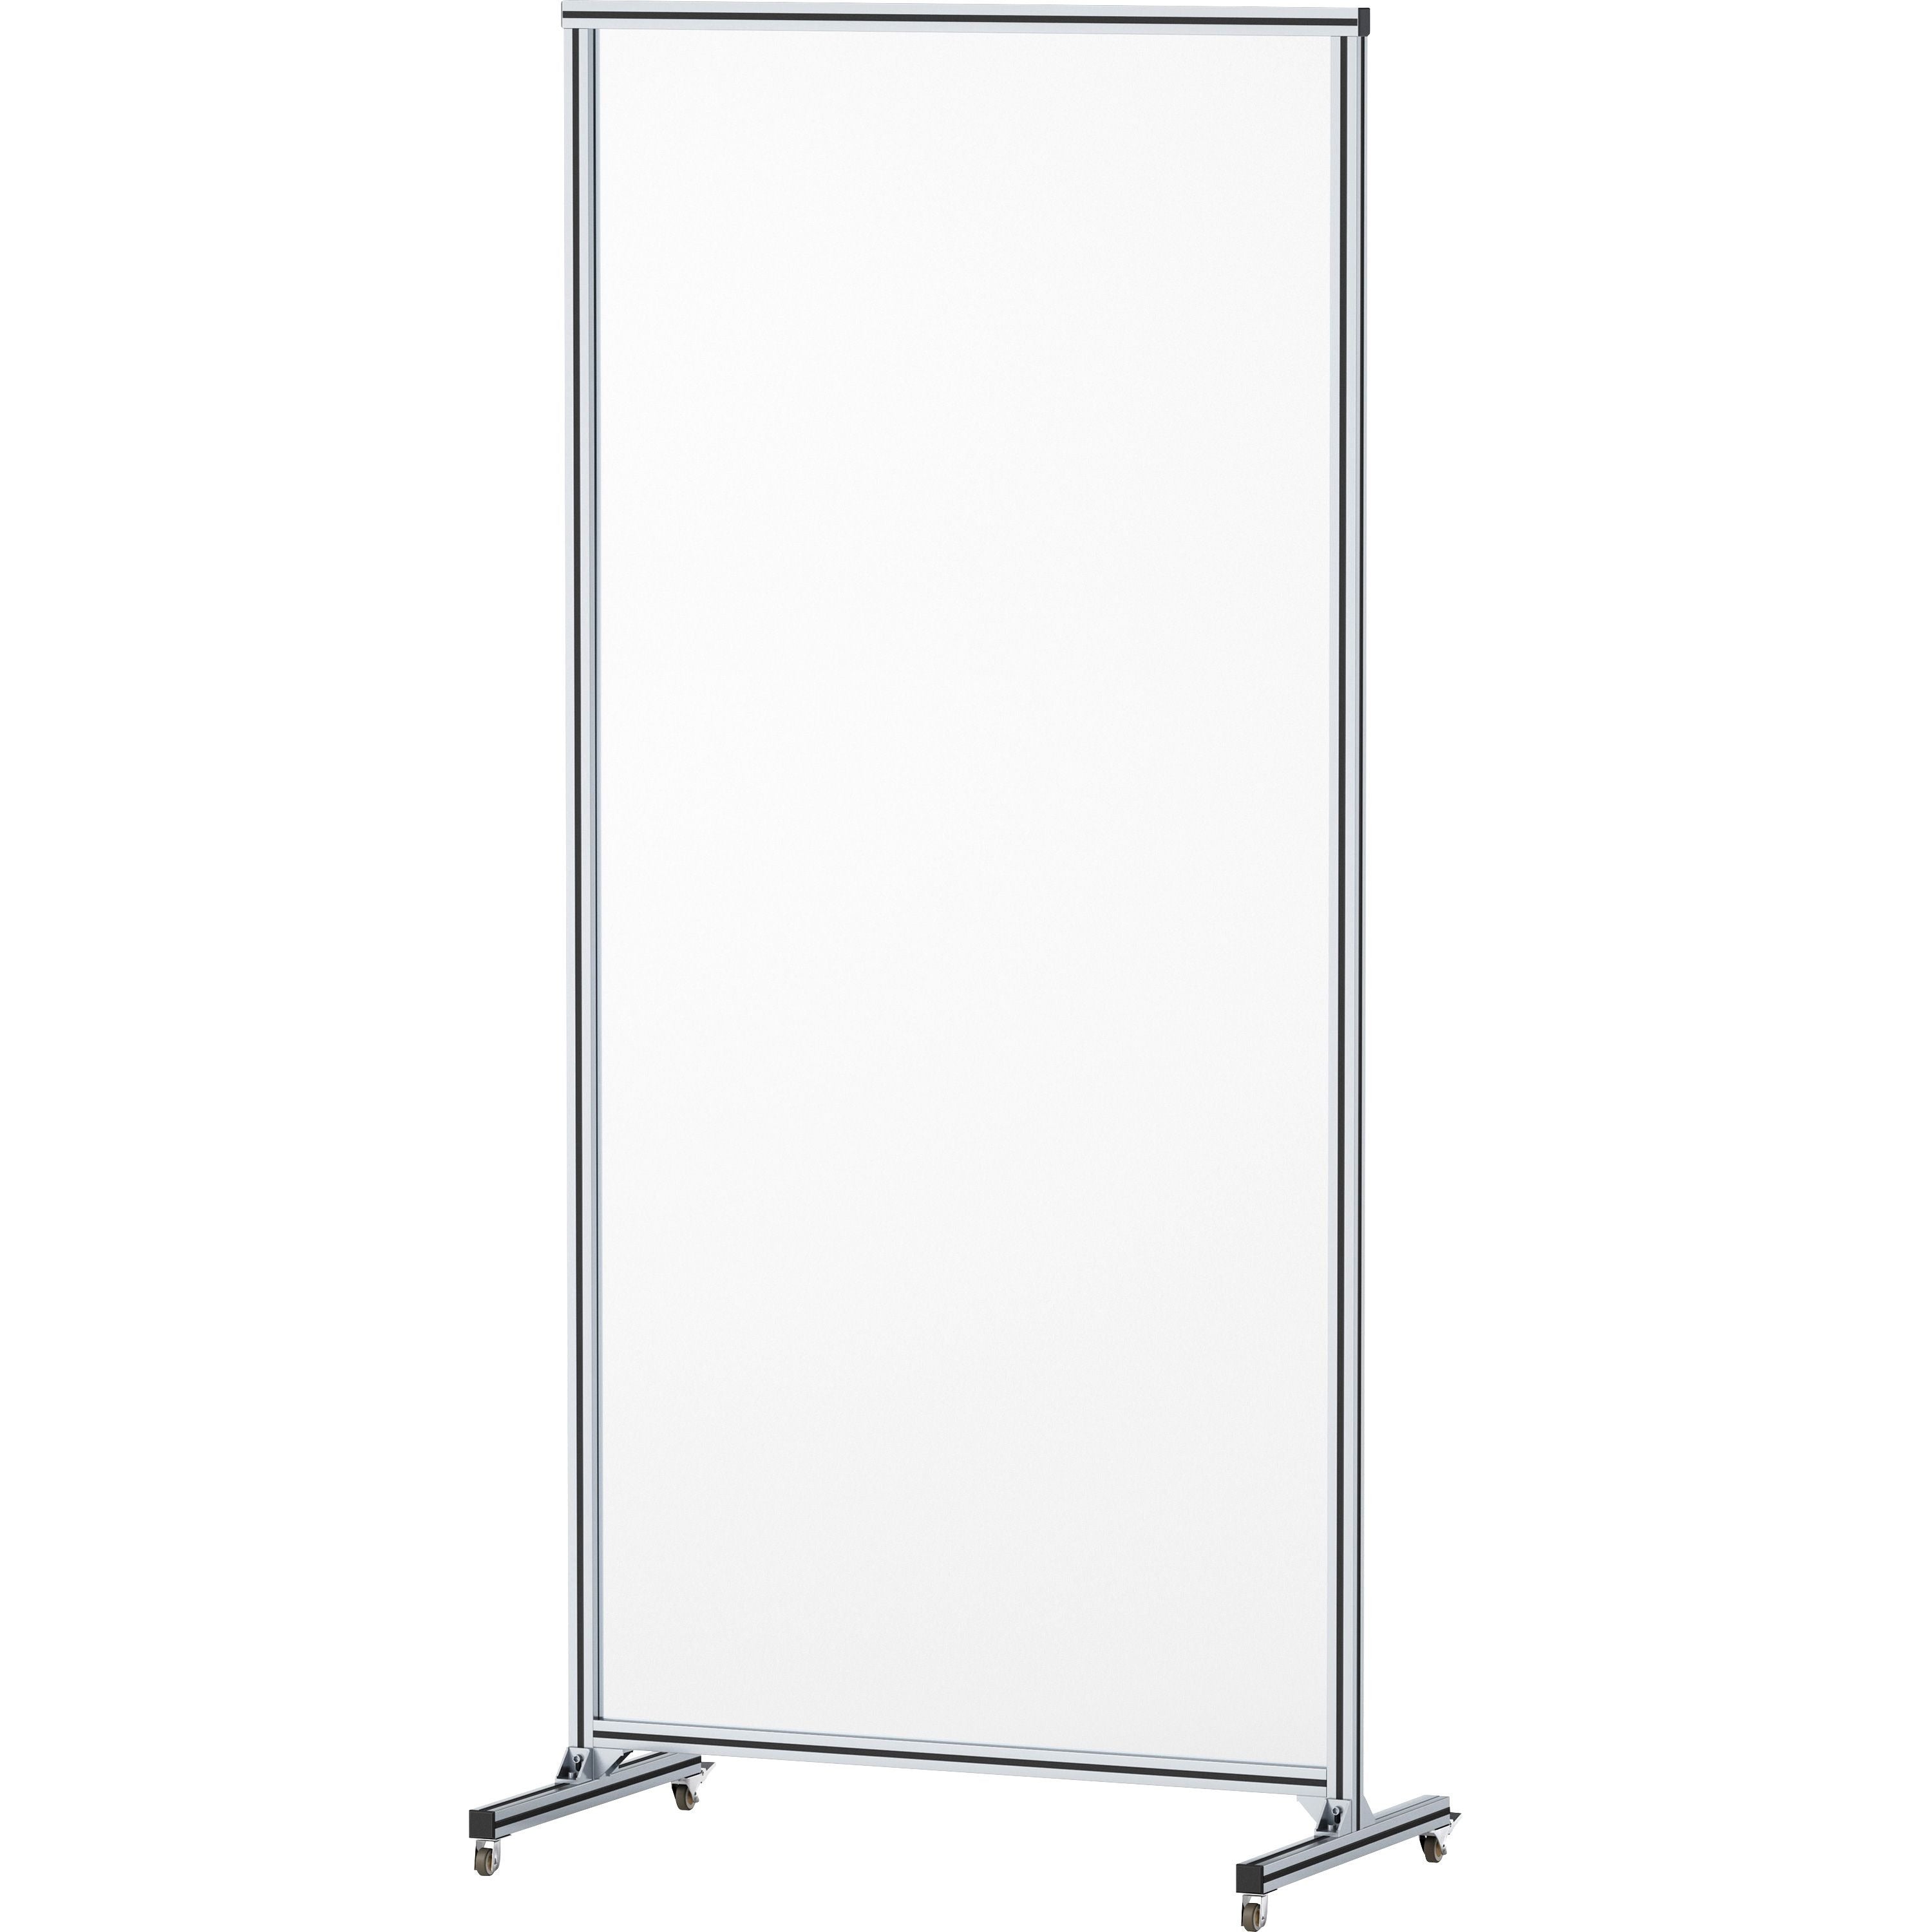 lorell-mobile-full-protective-glass-screen-36-width-x-03-depth-x-78-height-1-each-clear-tempered-glass-aluminum_llr55673 - 4